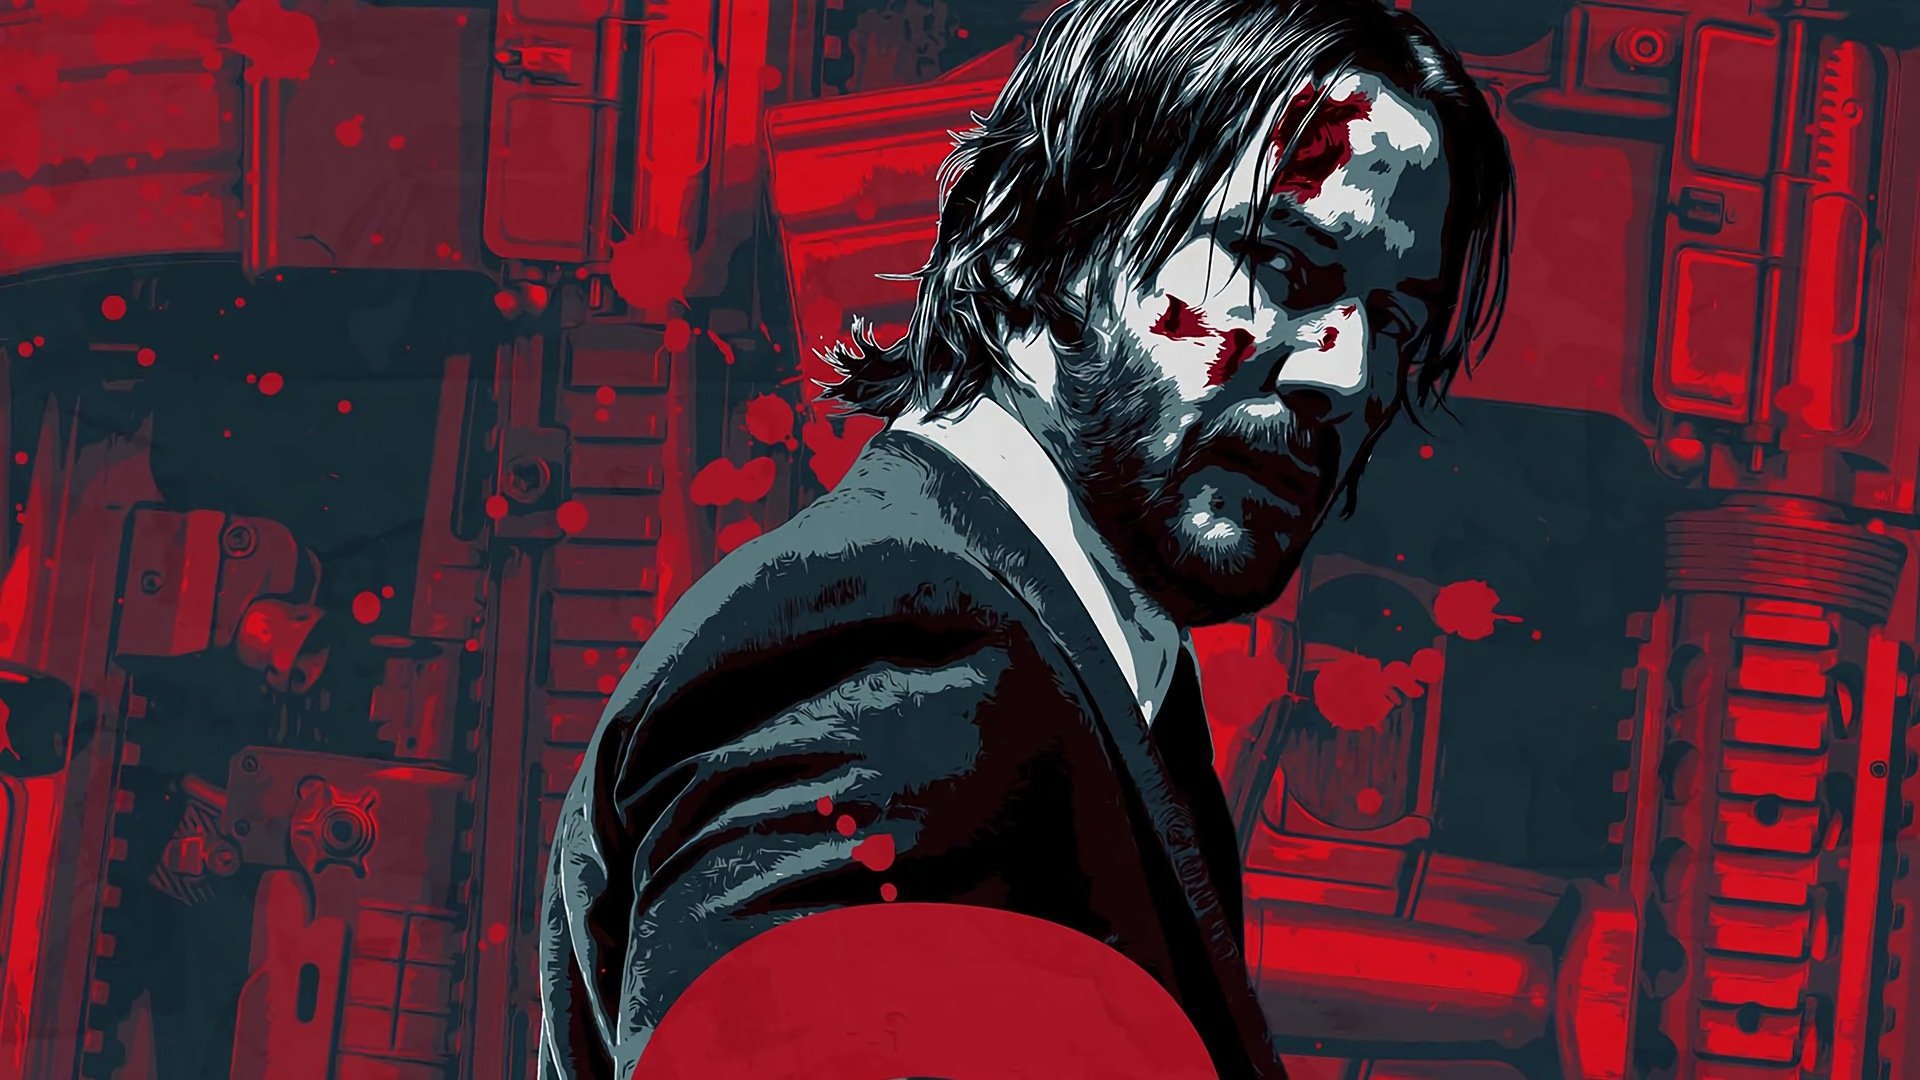 6 Best John Wick HD 4K Wallpaper To Download For Phone or PC